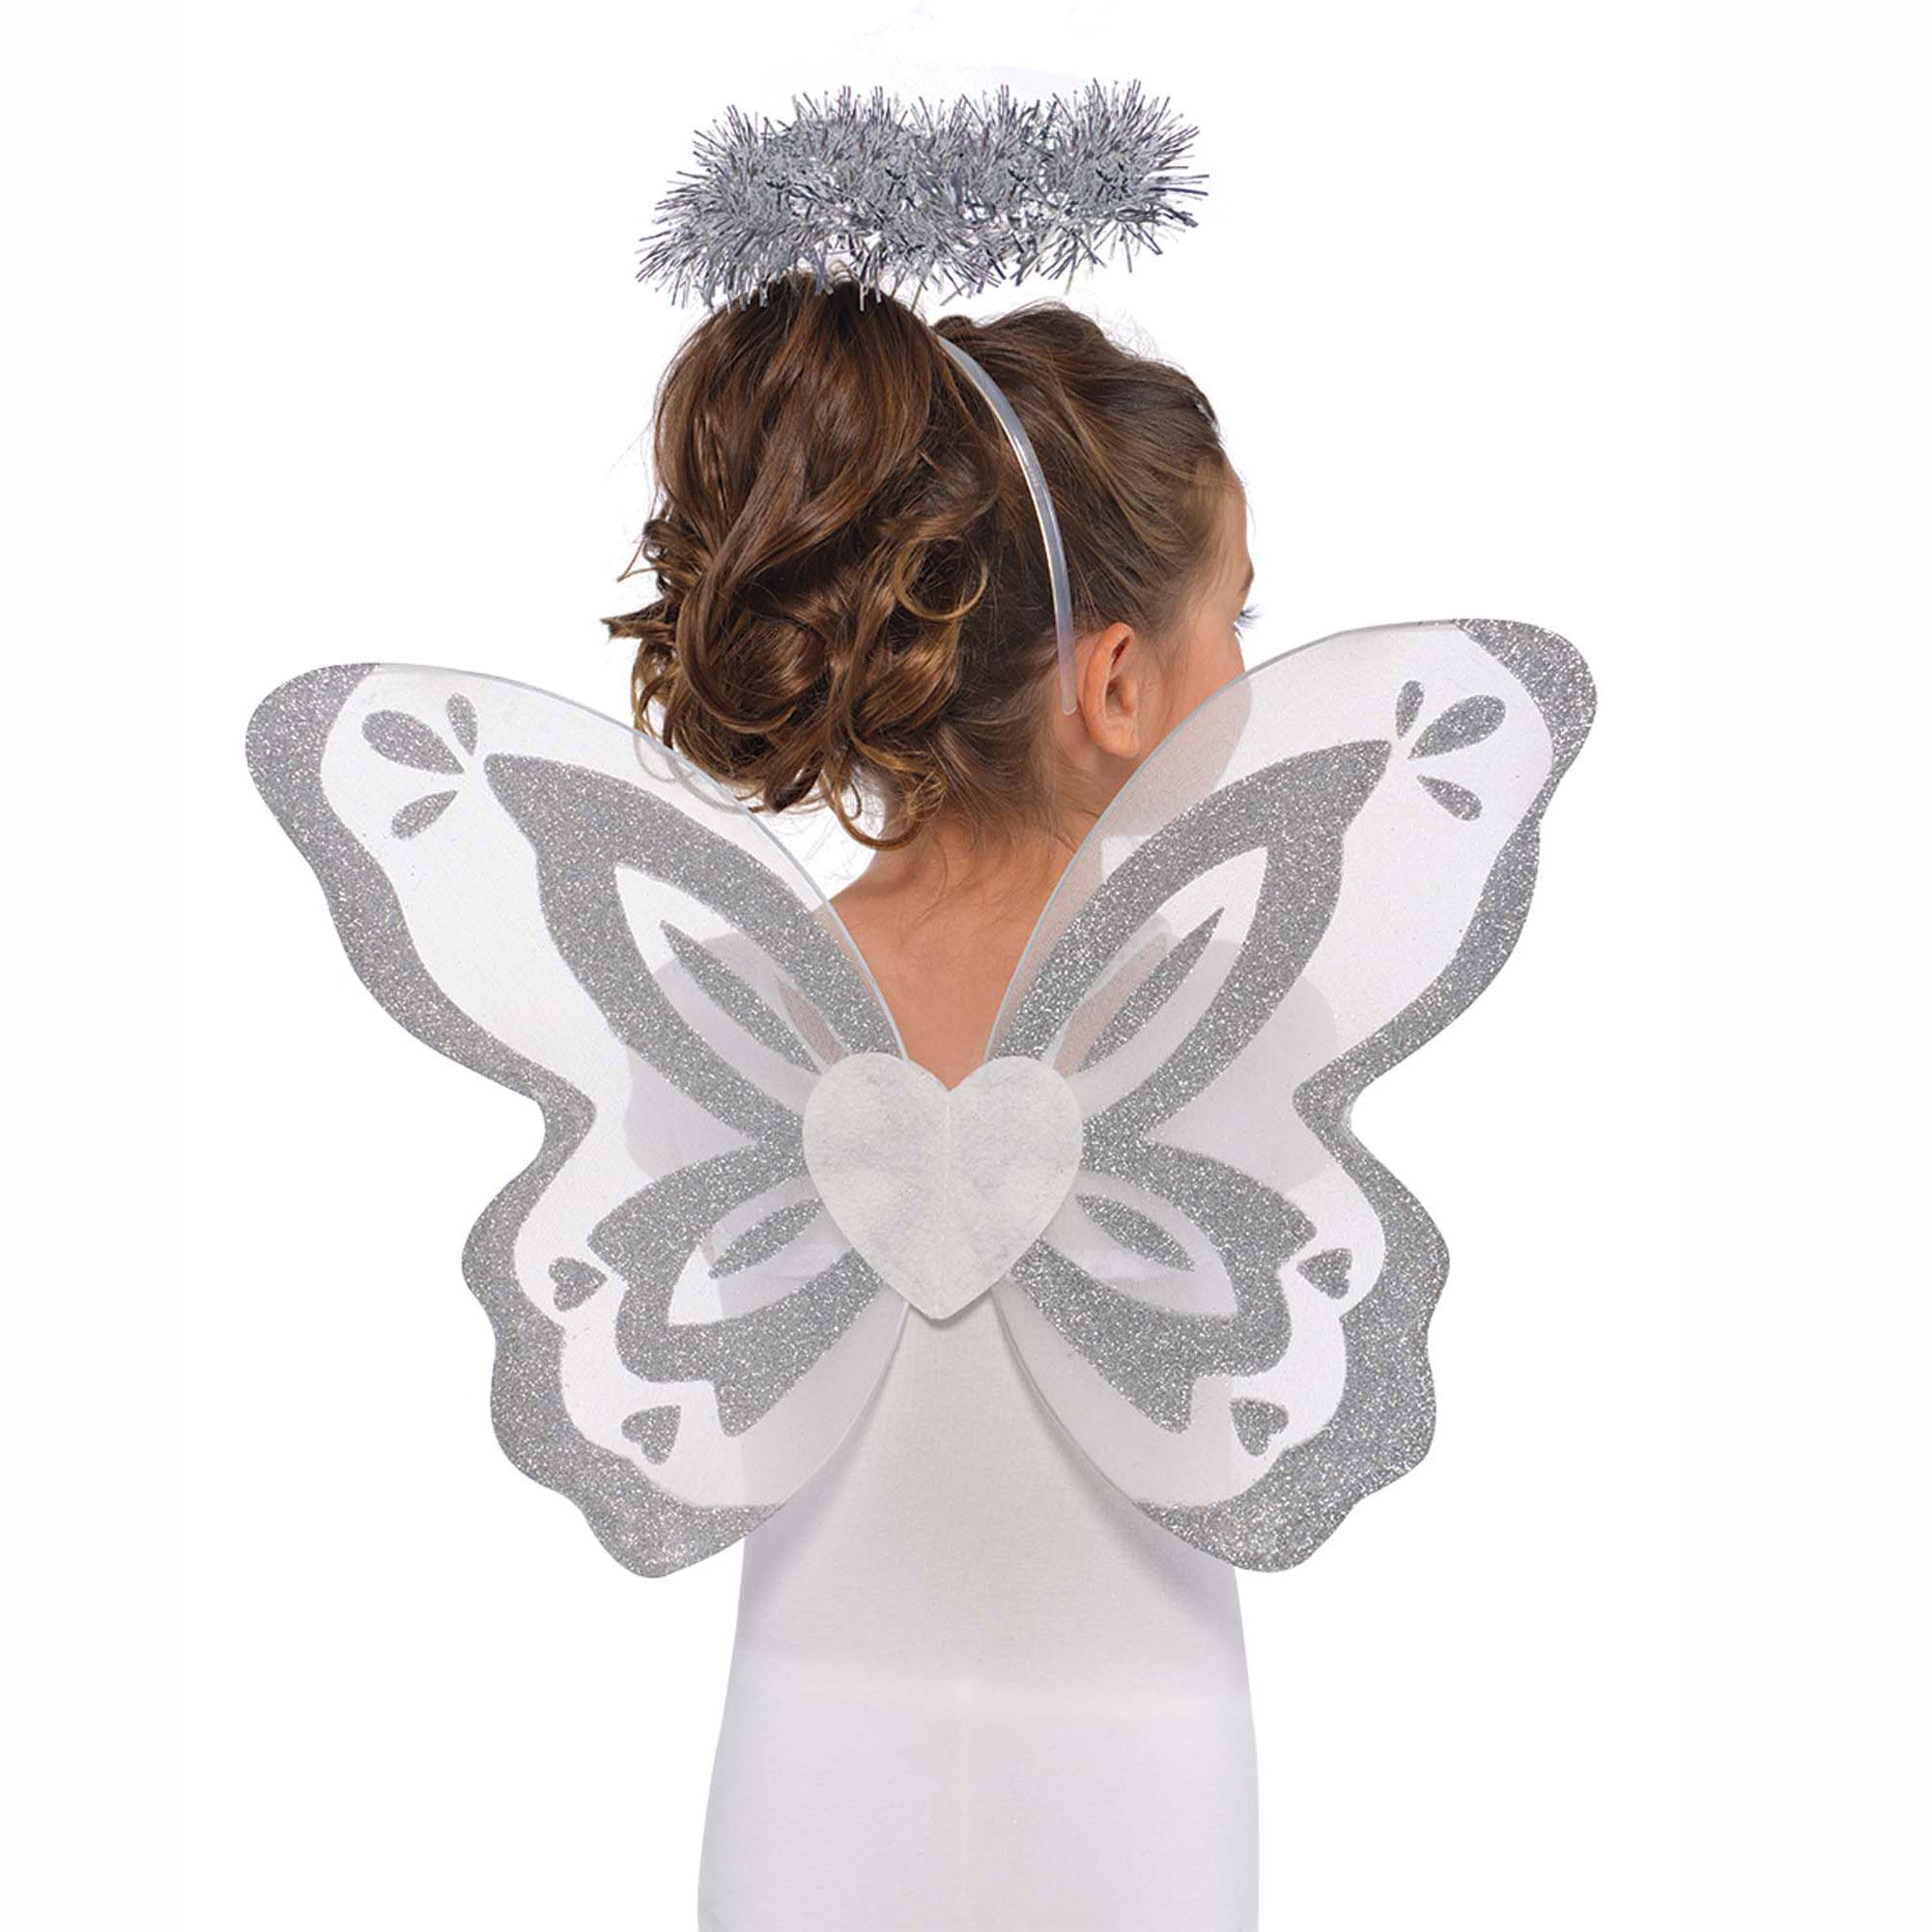 Angel Kit - Child Costumes & Apparel - Party Centre